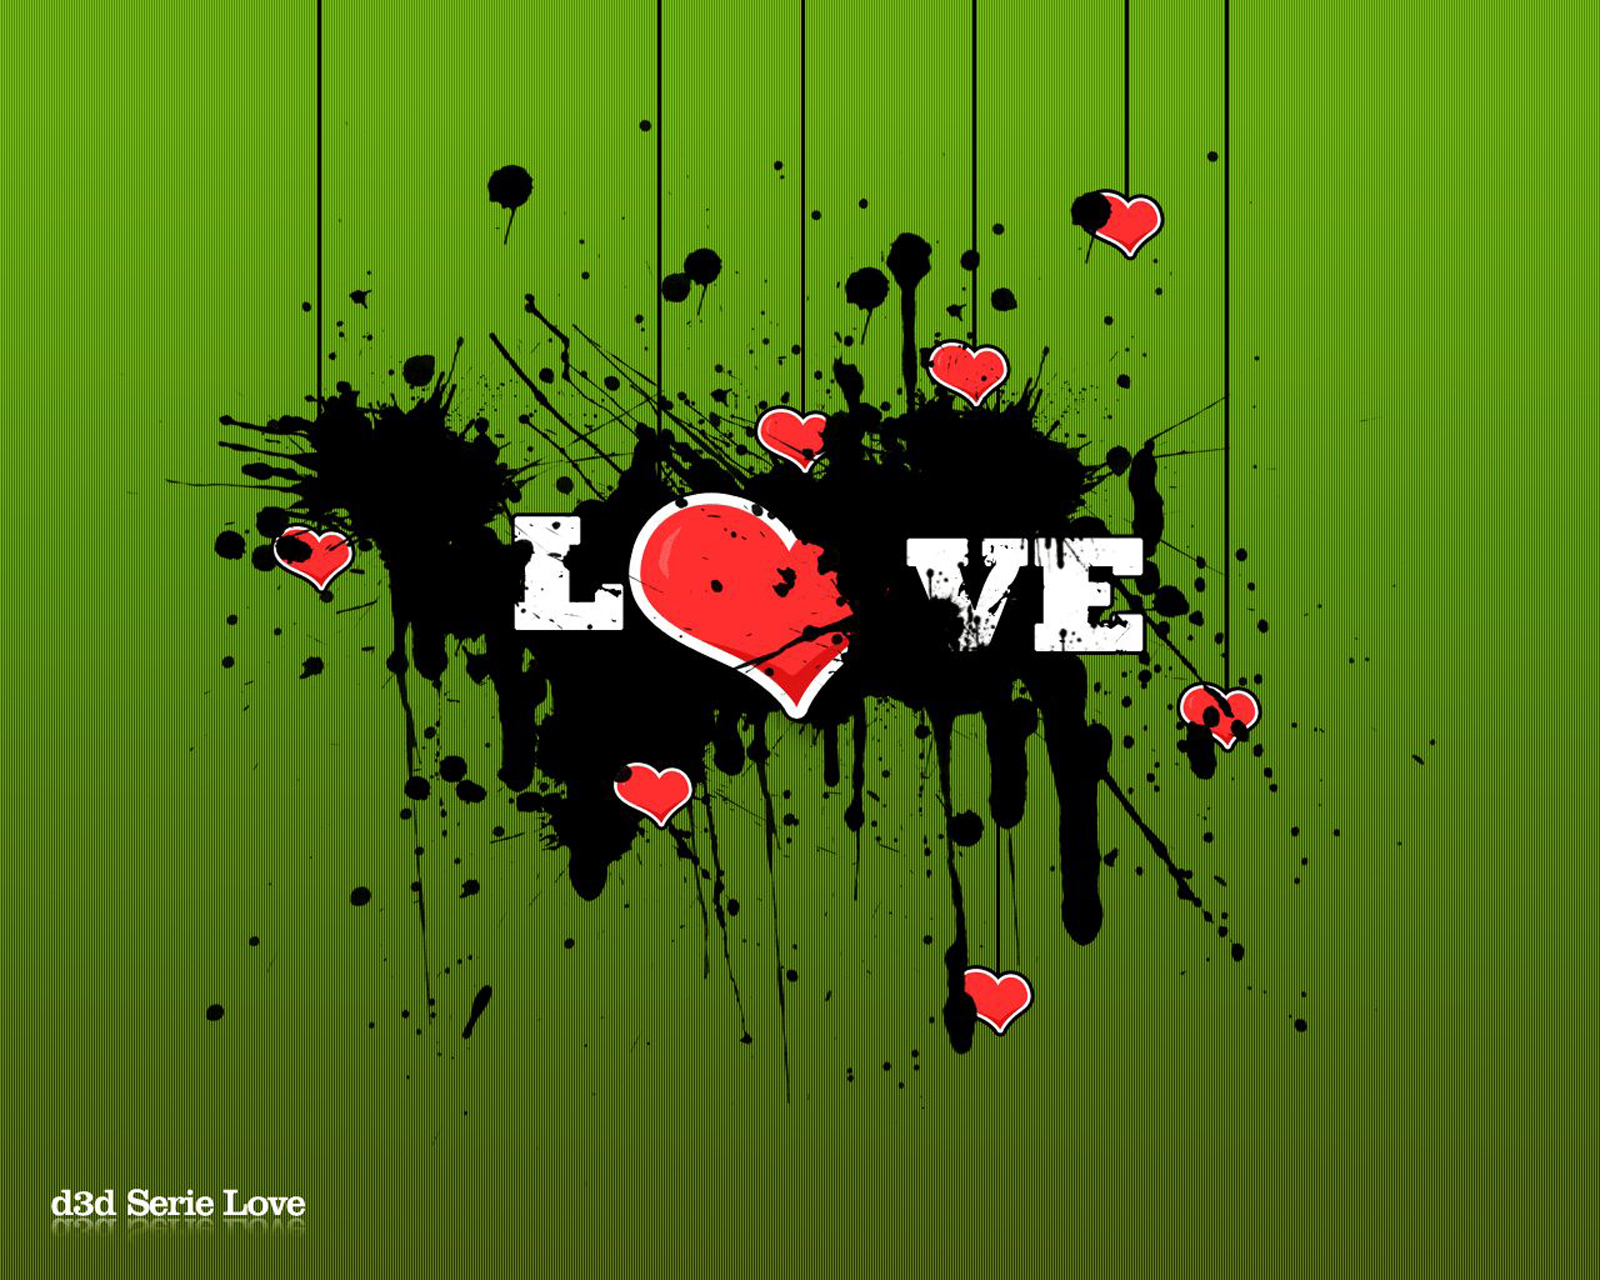 Emo Heart of Love wallpapers and images - wallpapers, pictures, photos